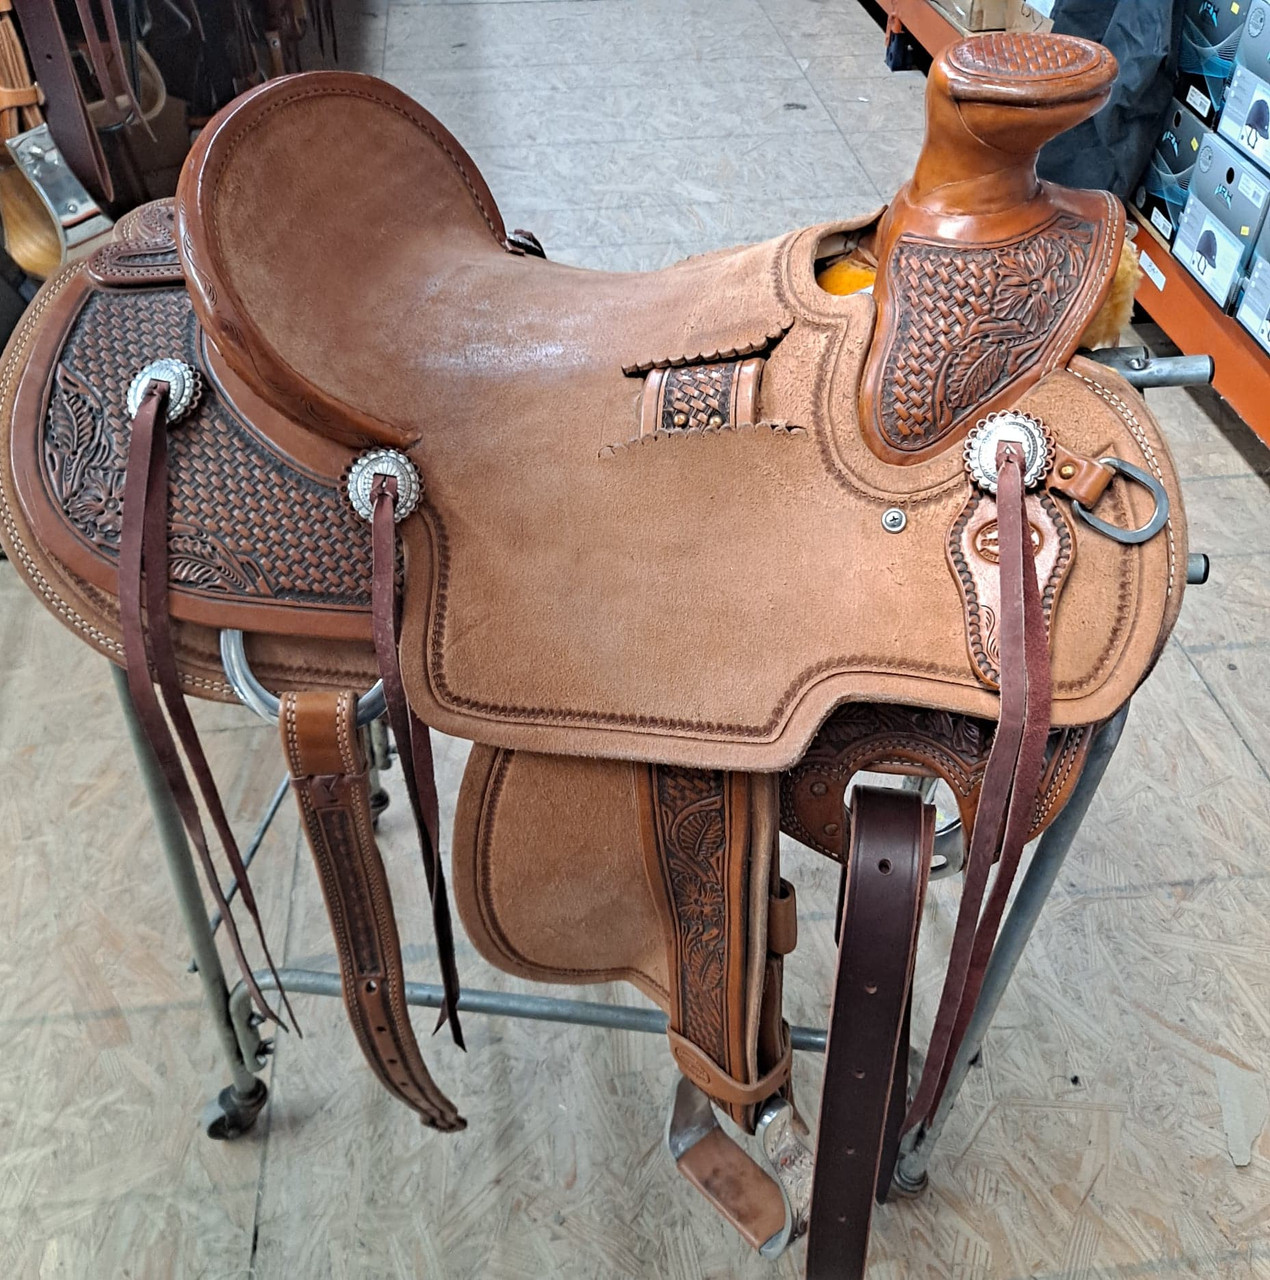 New Wade Saddle by Fort Worth Saddle Co with 16 inch seat. Hermann Oak leather in light oil antique. Tooled exposed stirrup leathers. Leather latigo and offside. Flank cinch included. Gullet size is 7 inch, weight is 38lbs, and skirt is 28.5 inch. Made in USA. Limited lifetime warranty.

S1302